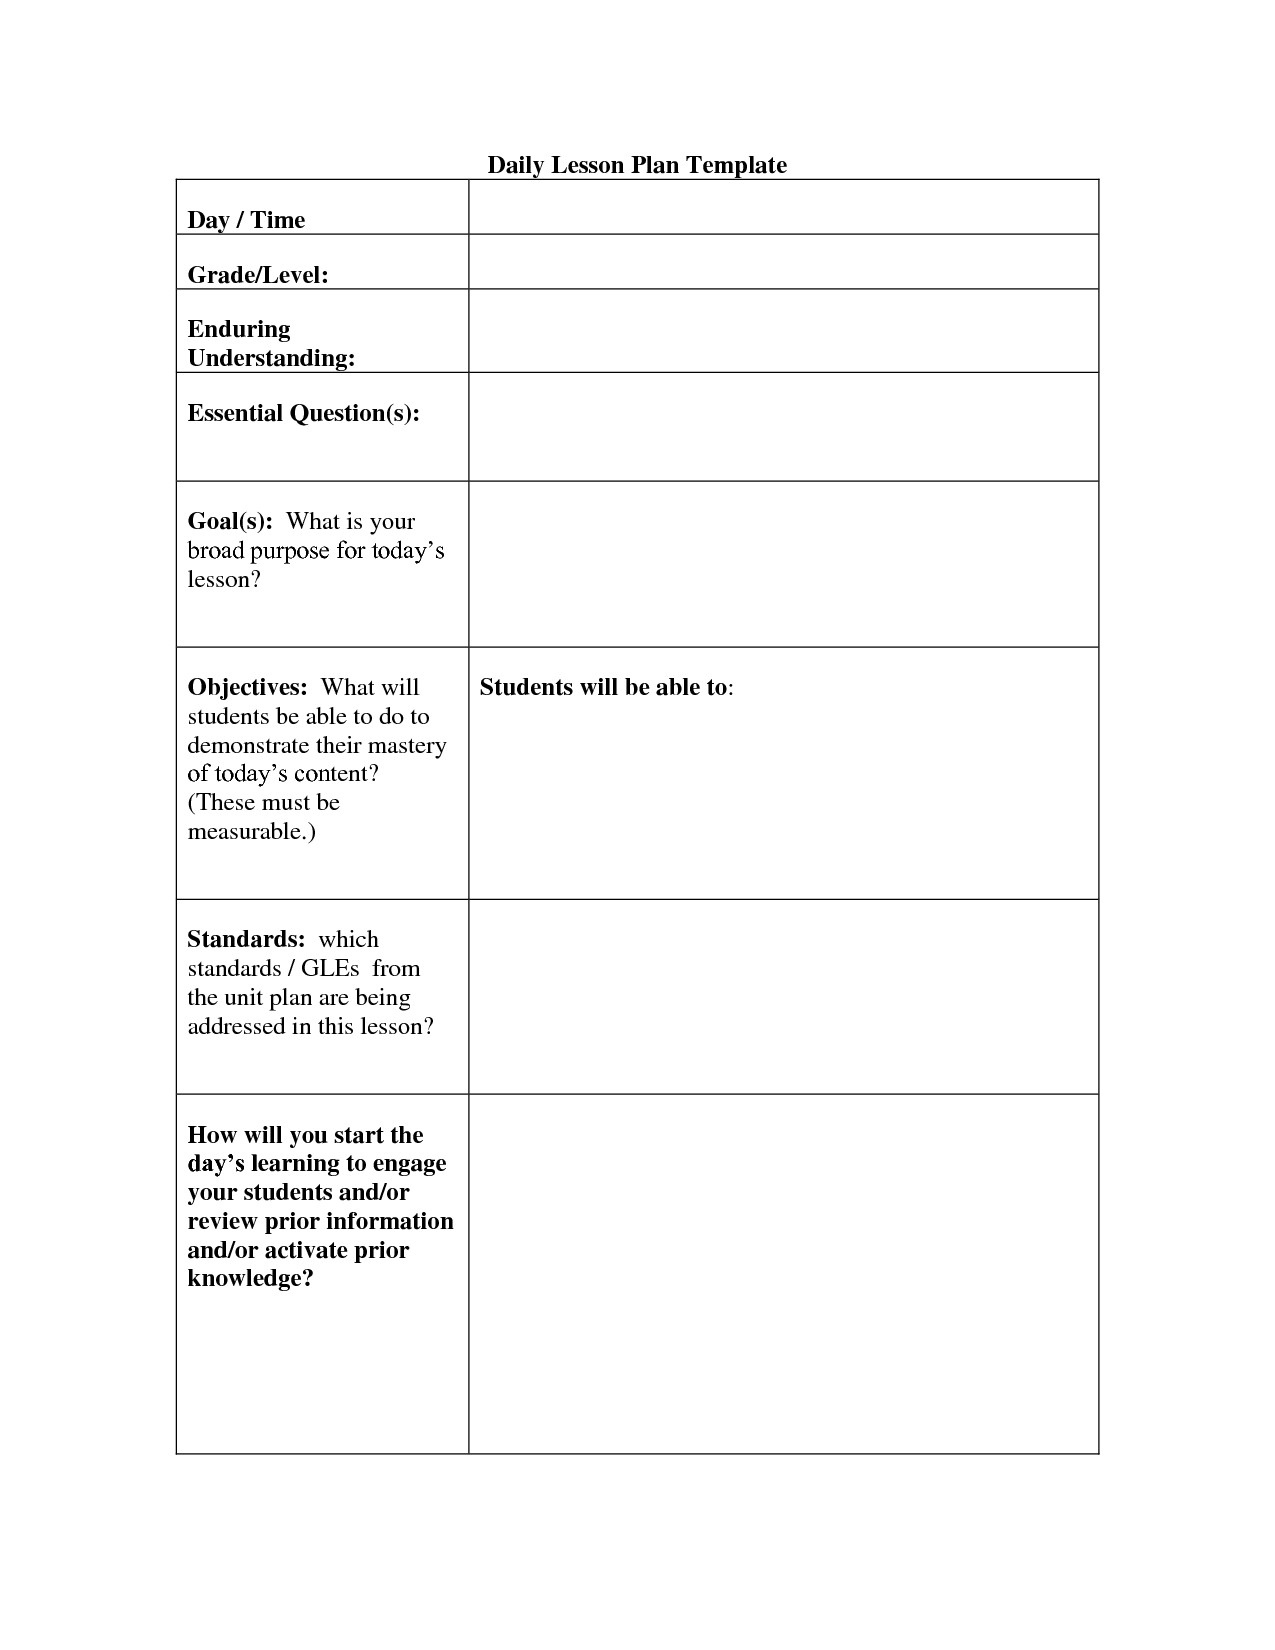 Daily Lesson Plan Daily Lesson Plan Template